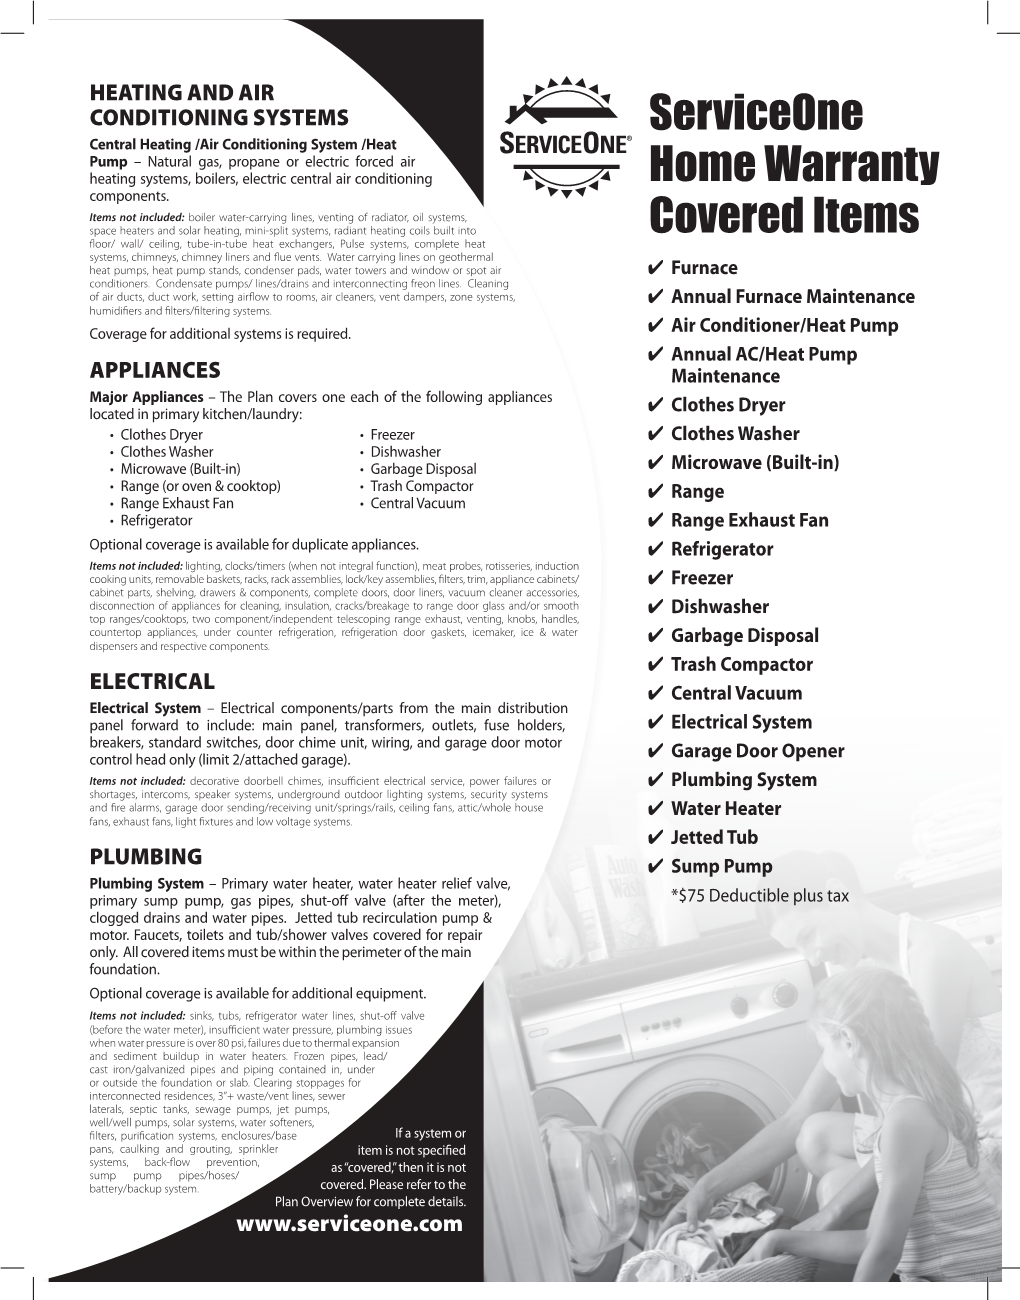 Serviceone Home Warranty Covered Items